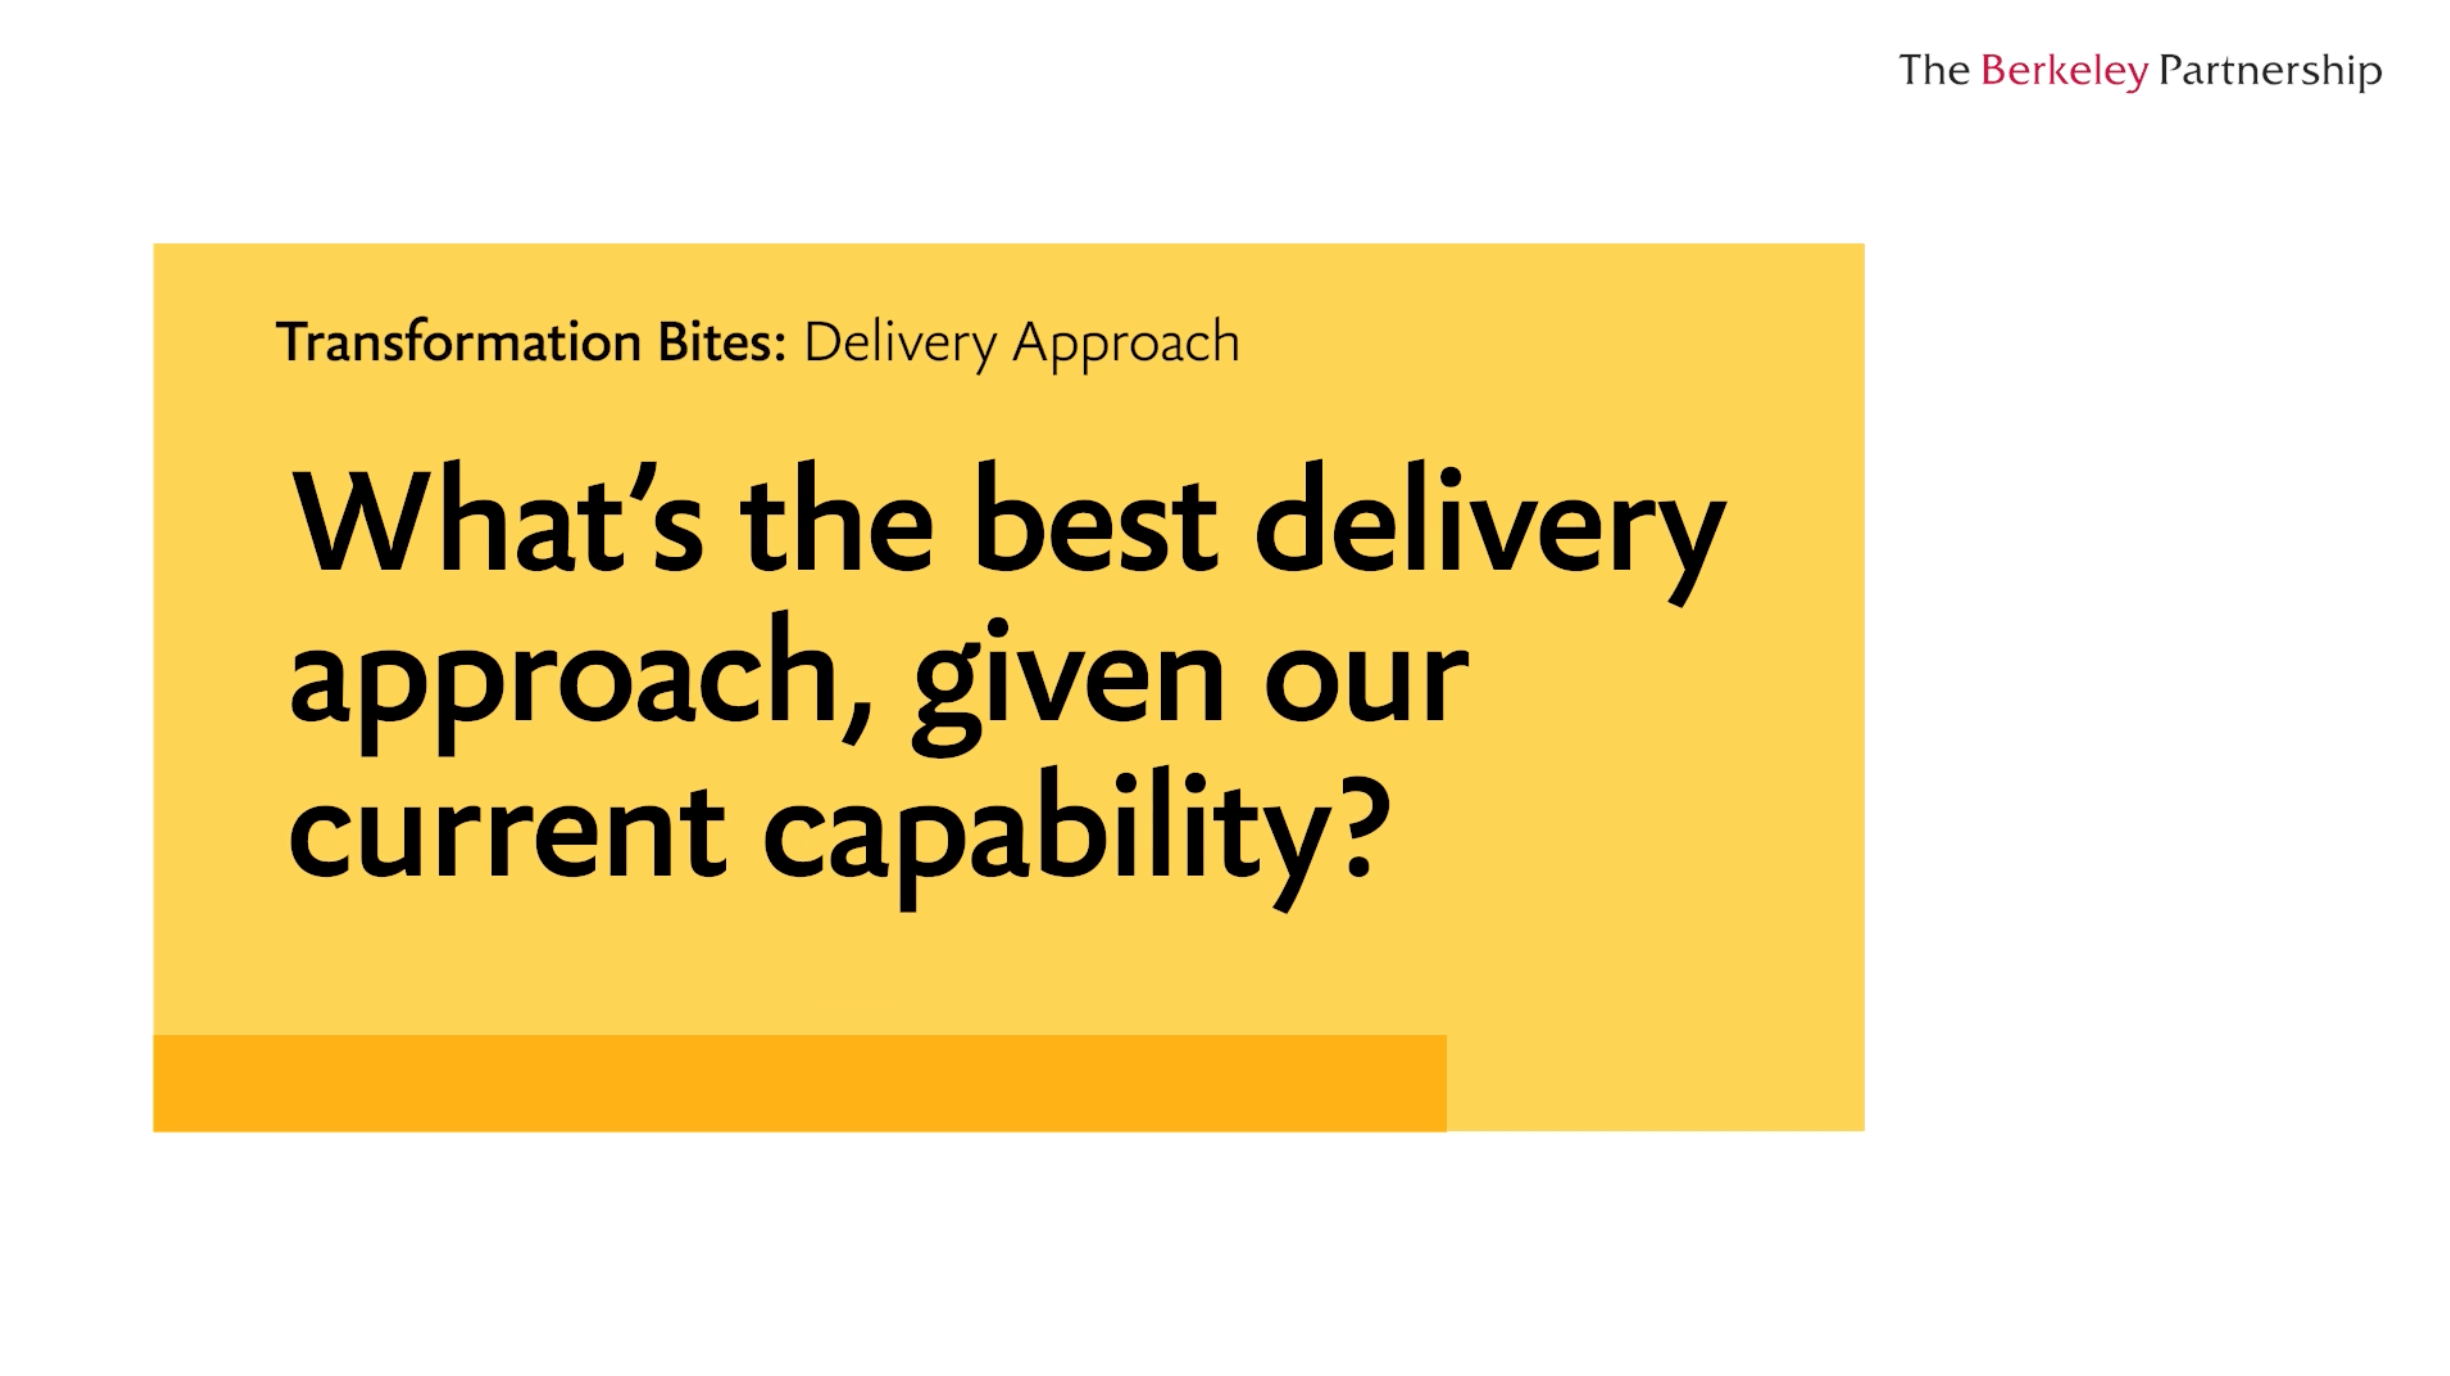 What’s the best delivery approach, given our current capability? 